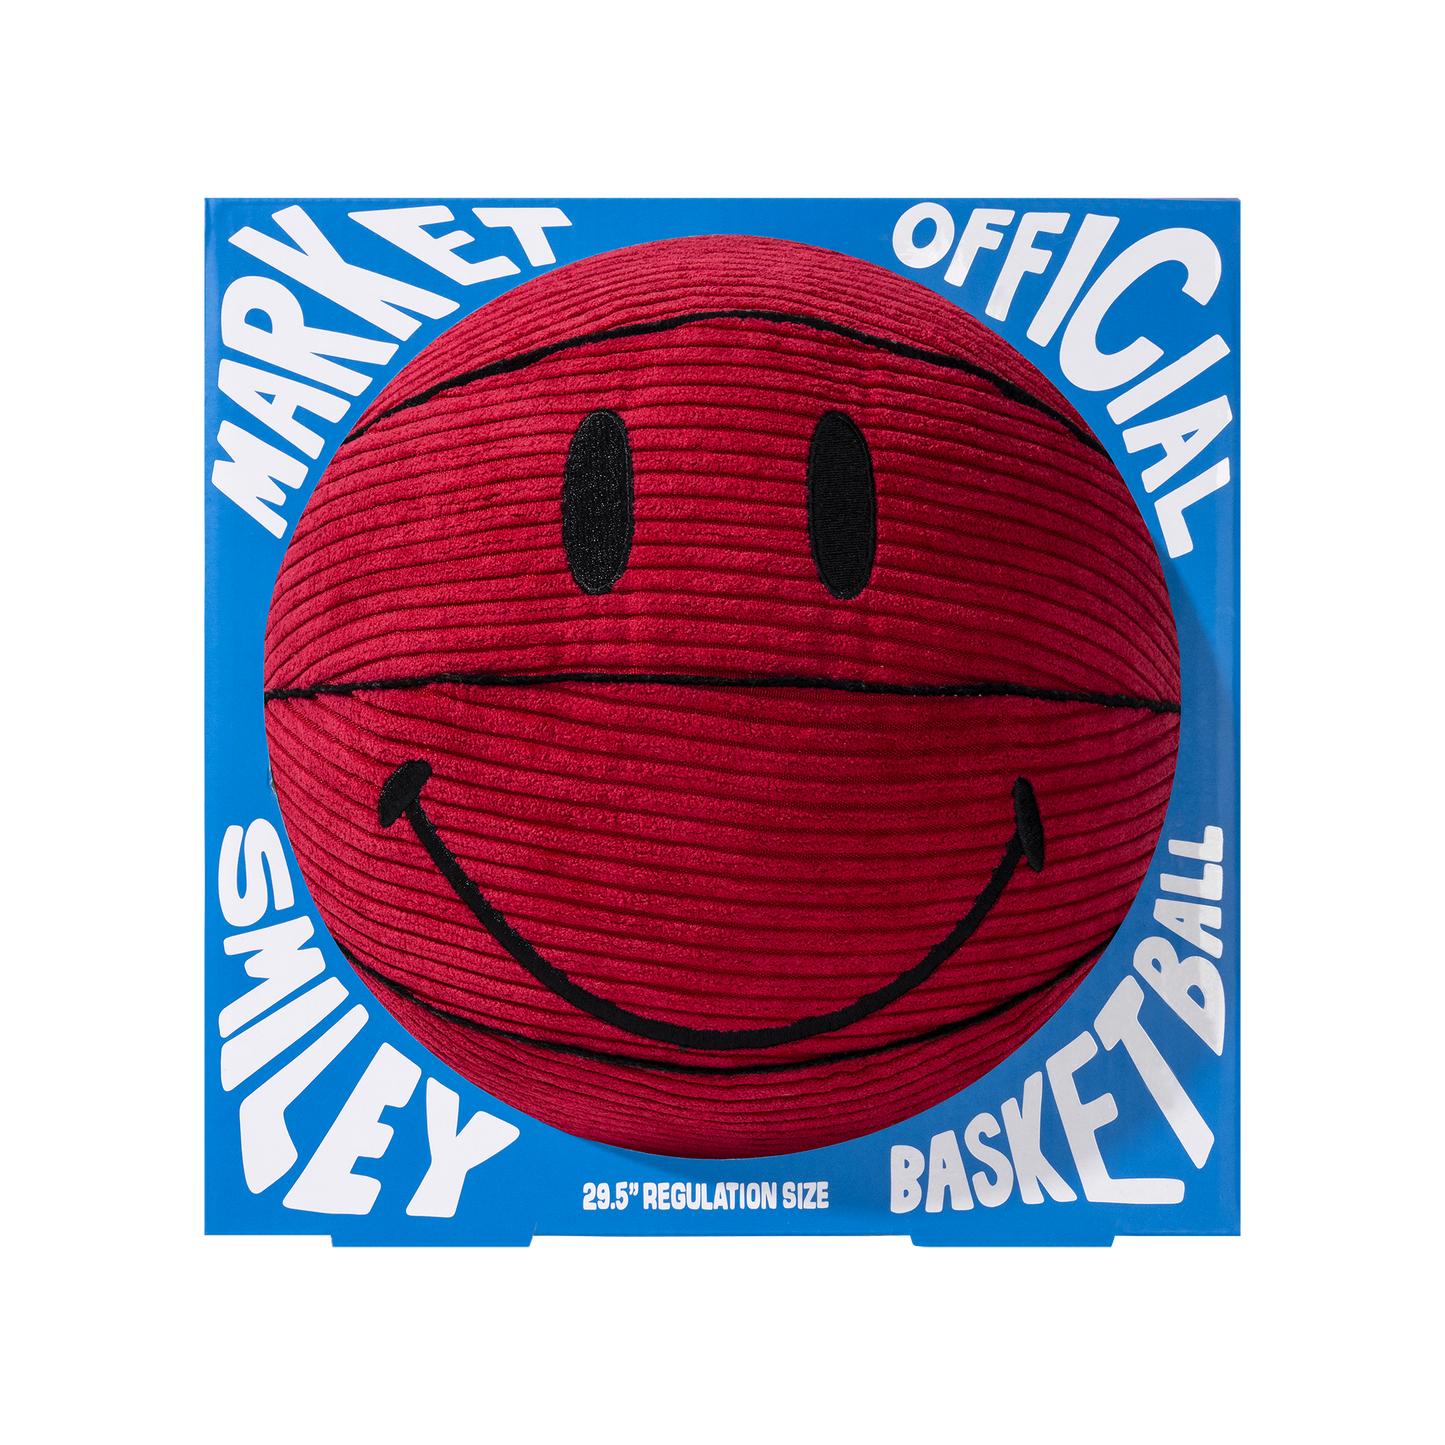 MARKET clothing brand SMILEY DEVIL PLUSH BASKETBALL. Find more homegoods and graphic tees at MarketStudios.com. Formally Chinatown Market. 